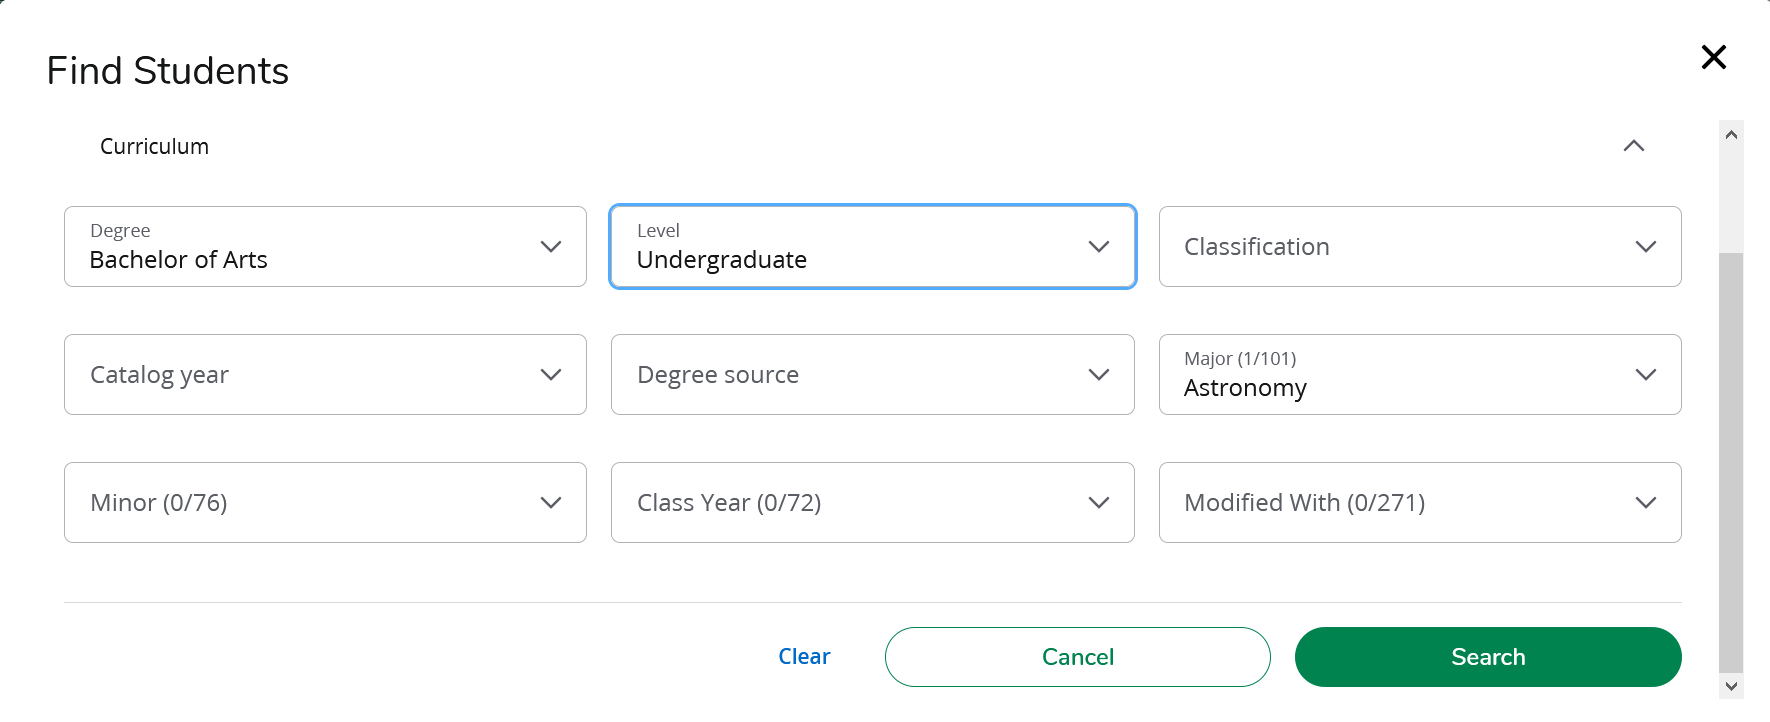 Search with criteria such as class year or major